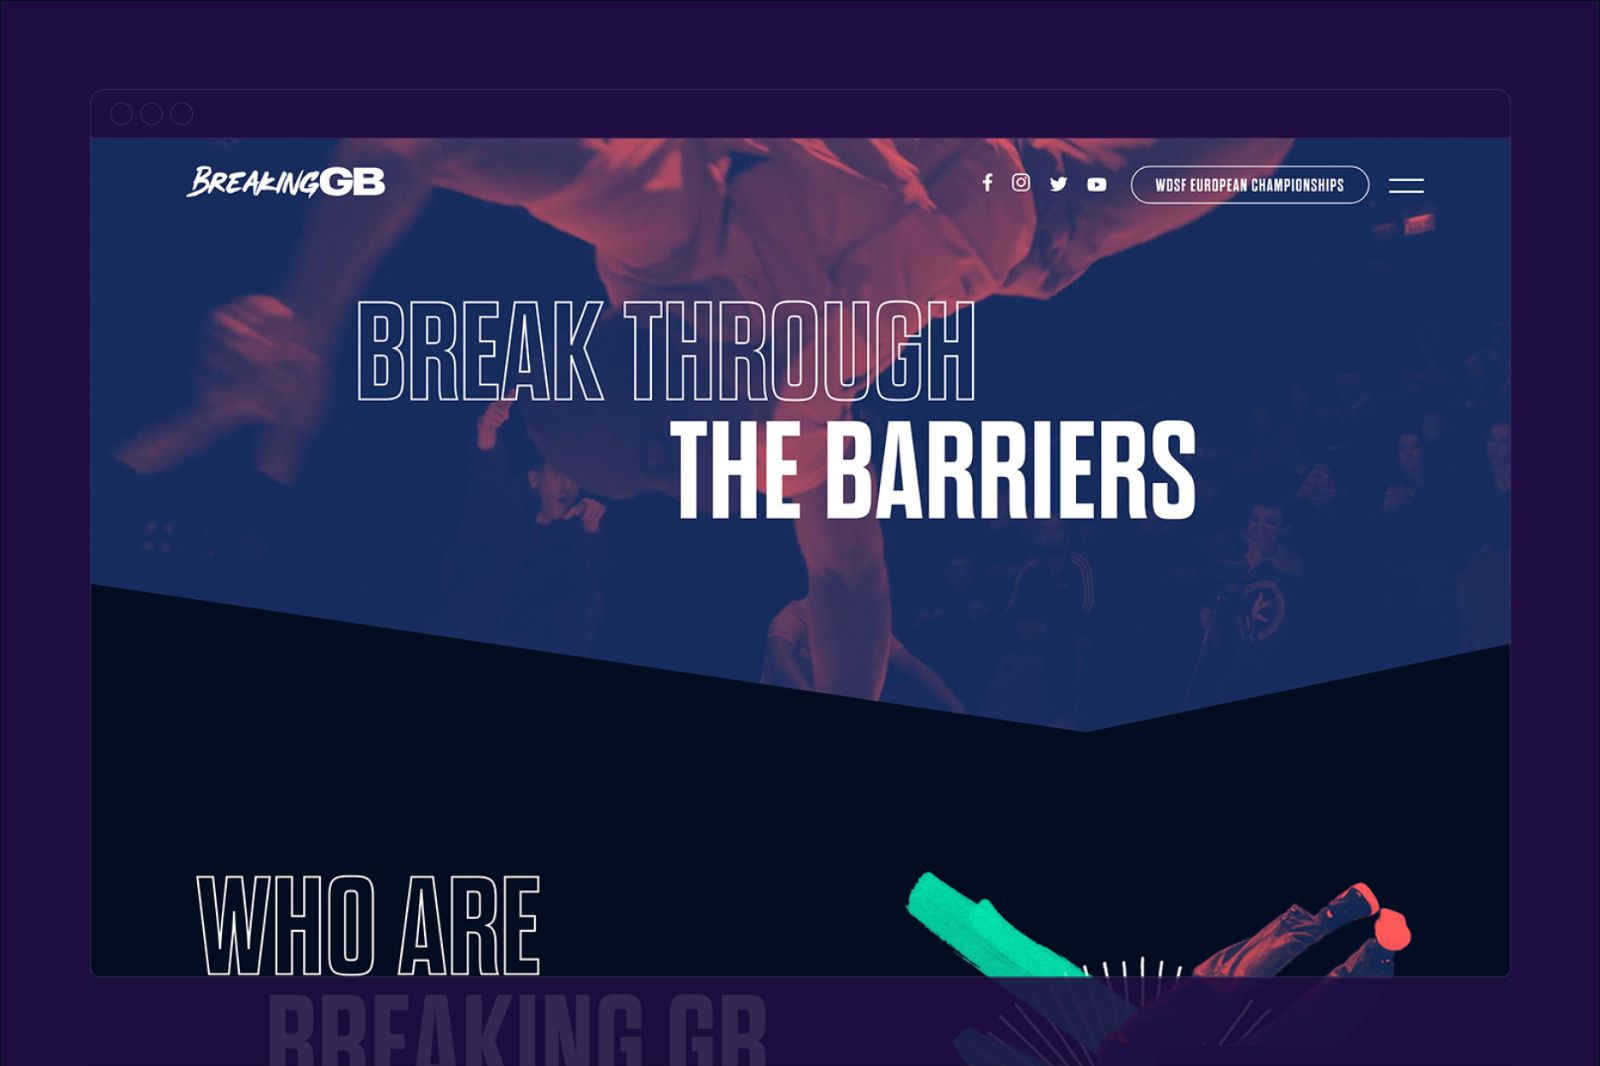 Breaking GB website design - Break through the barriers, who are breaking GB. Red and Blue graphic of people breaking.